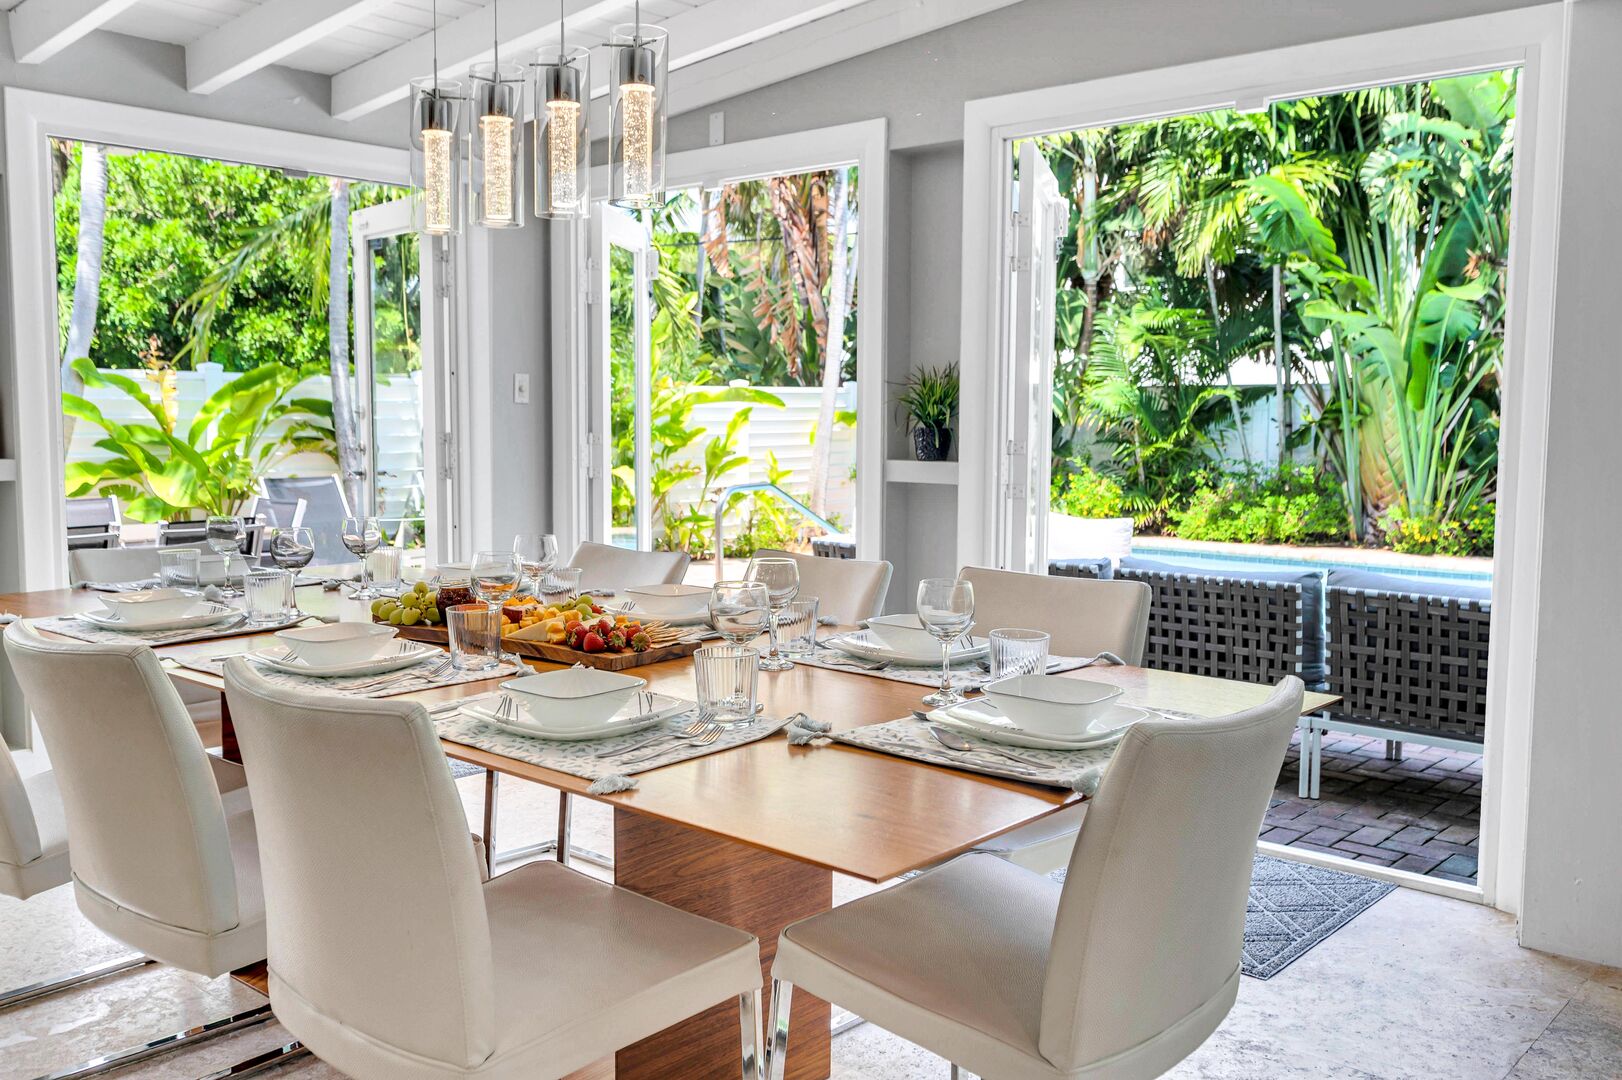 The dining room with its floor to ceiling windows offers pool views while letting in the year-round Florida sun.